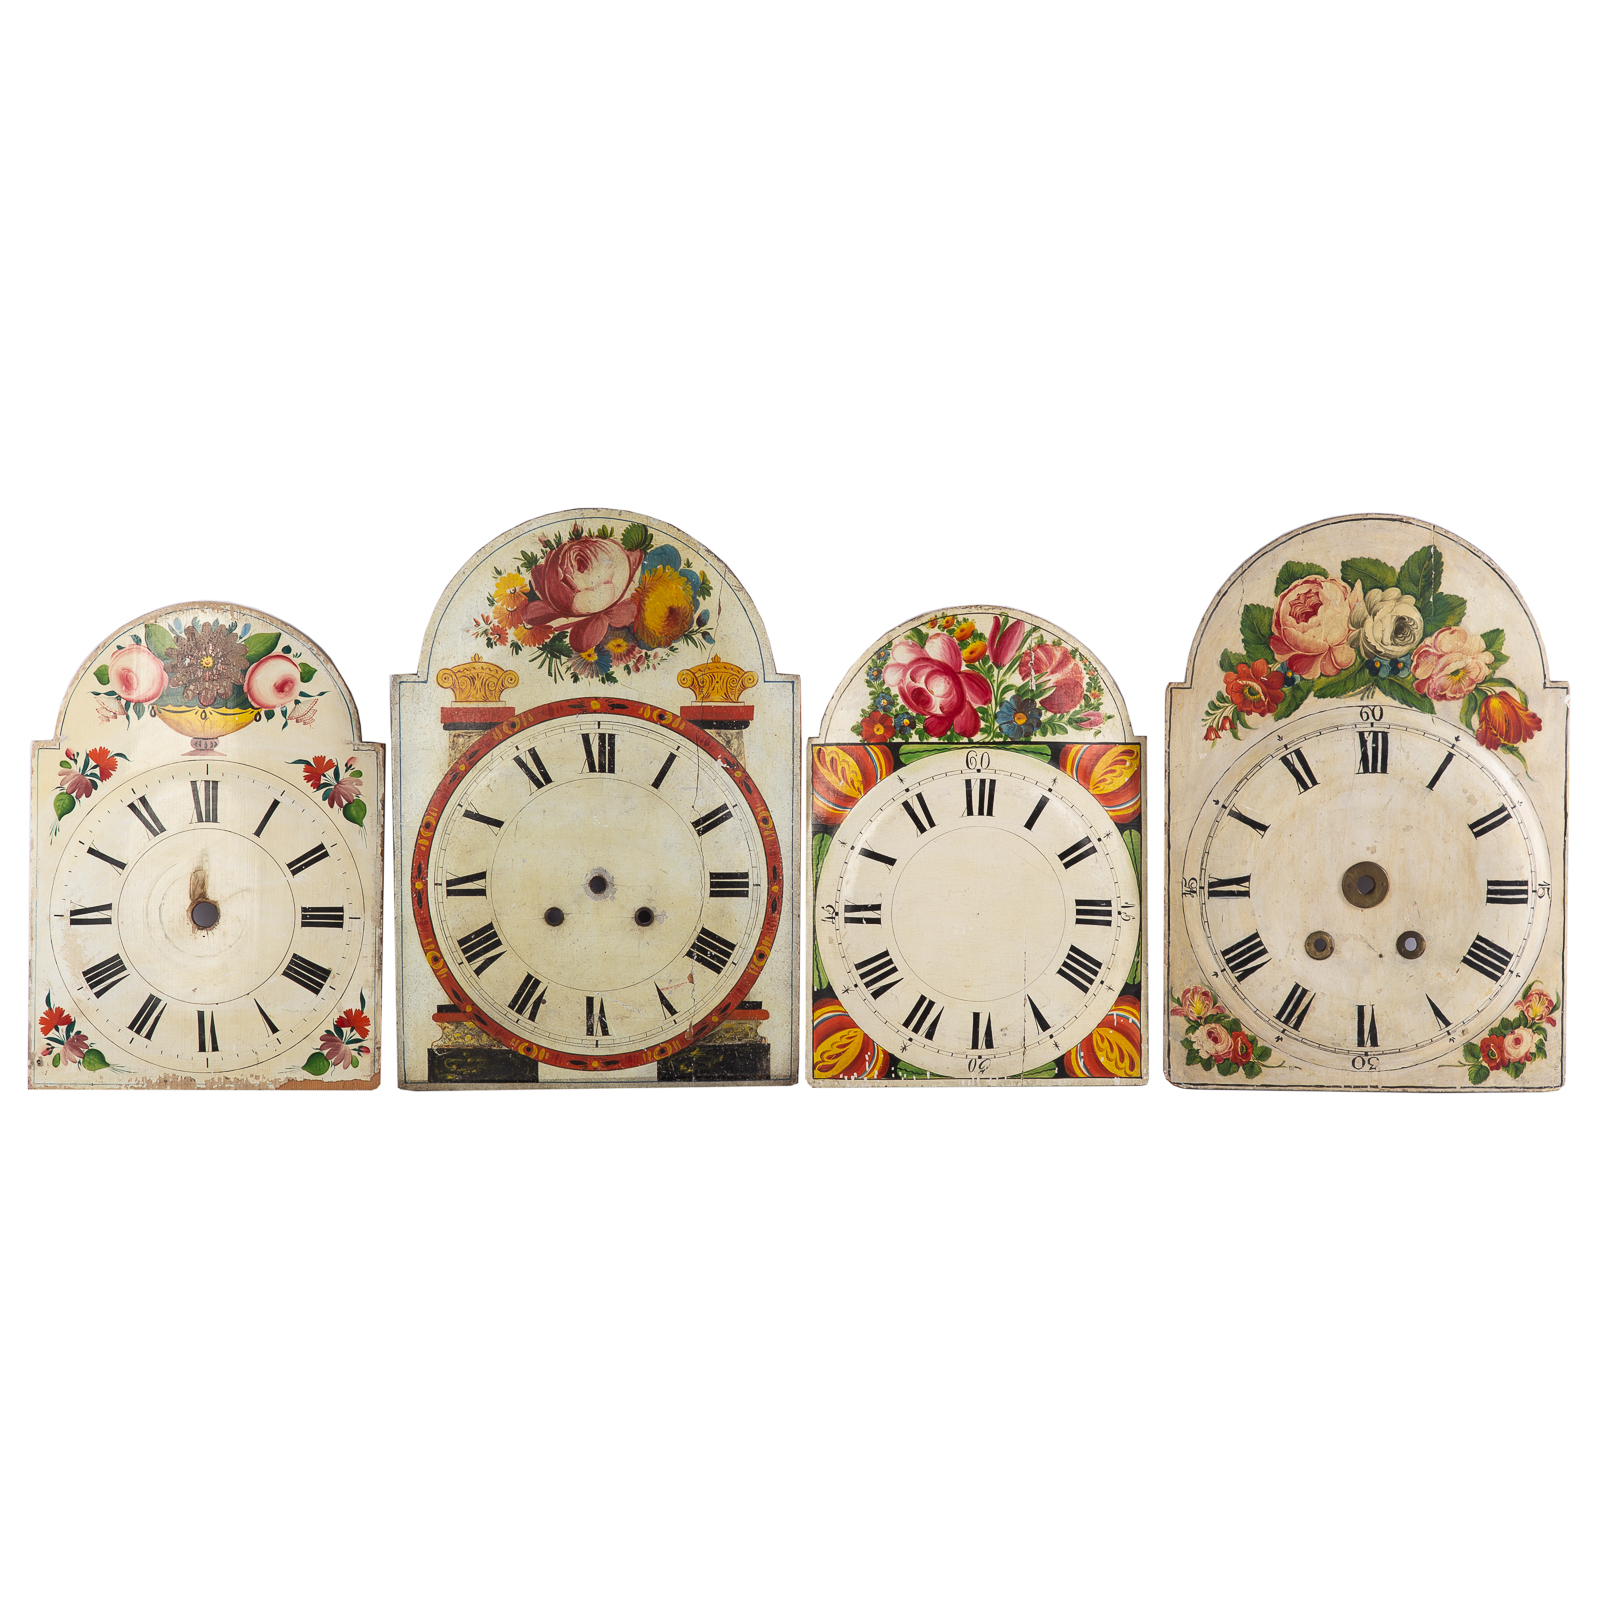 FOUR PAINTED WOOD CLOCK FACES 19th